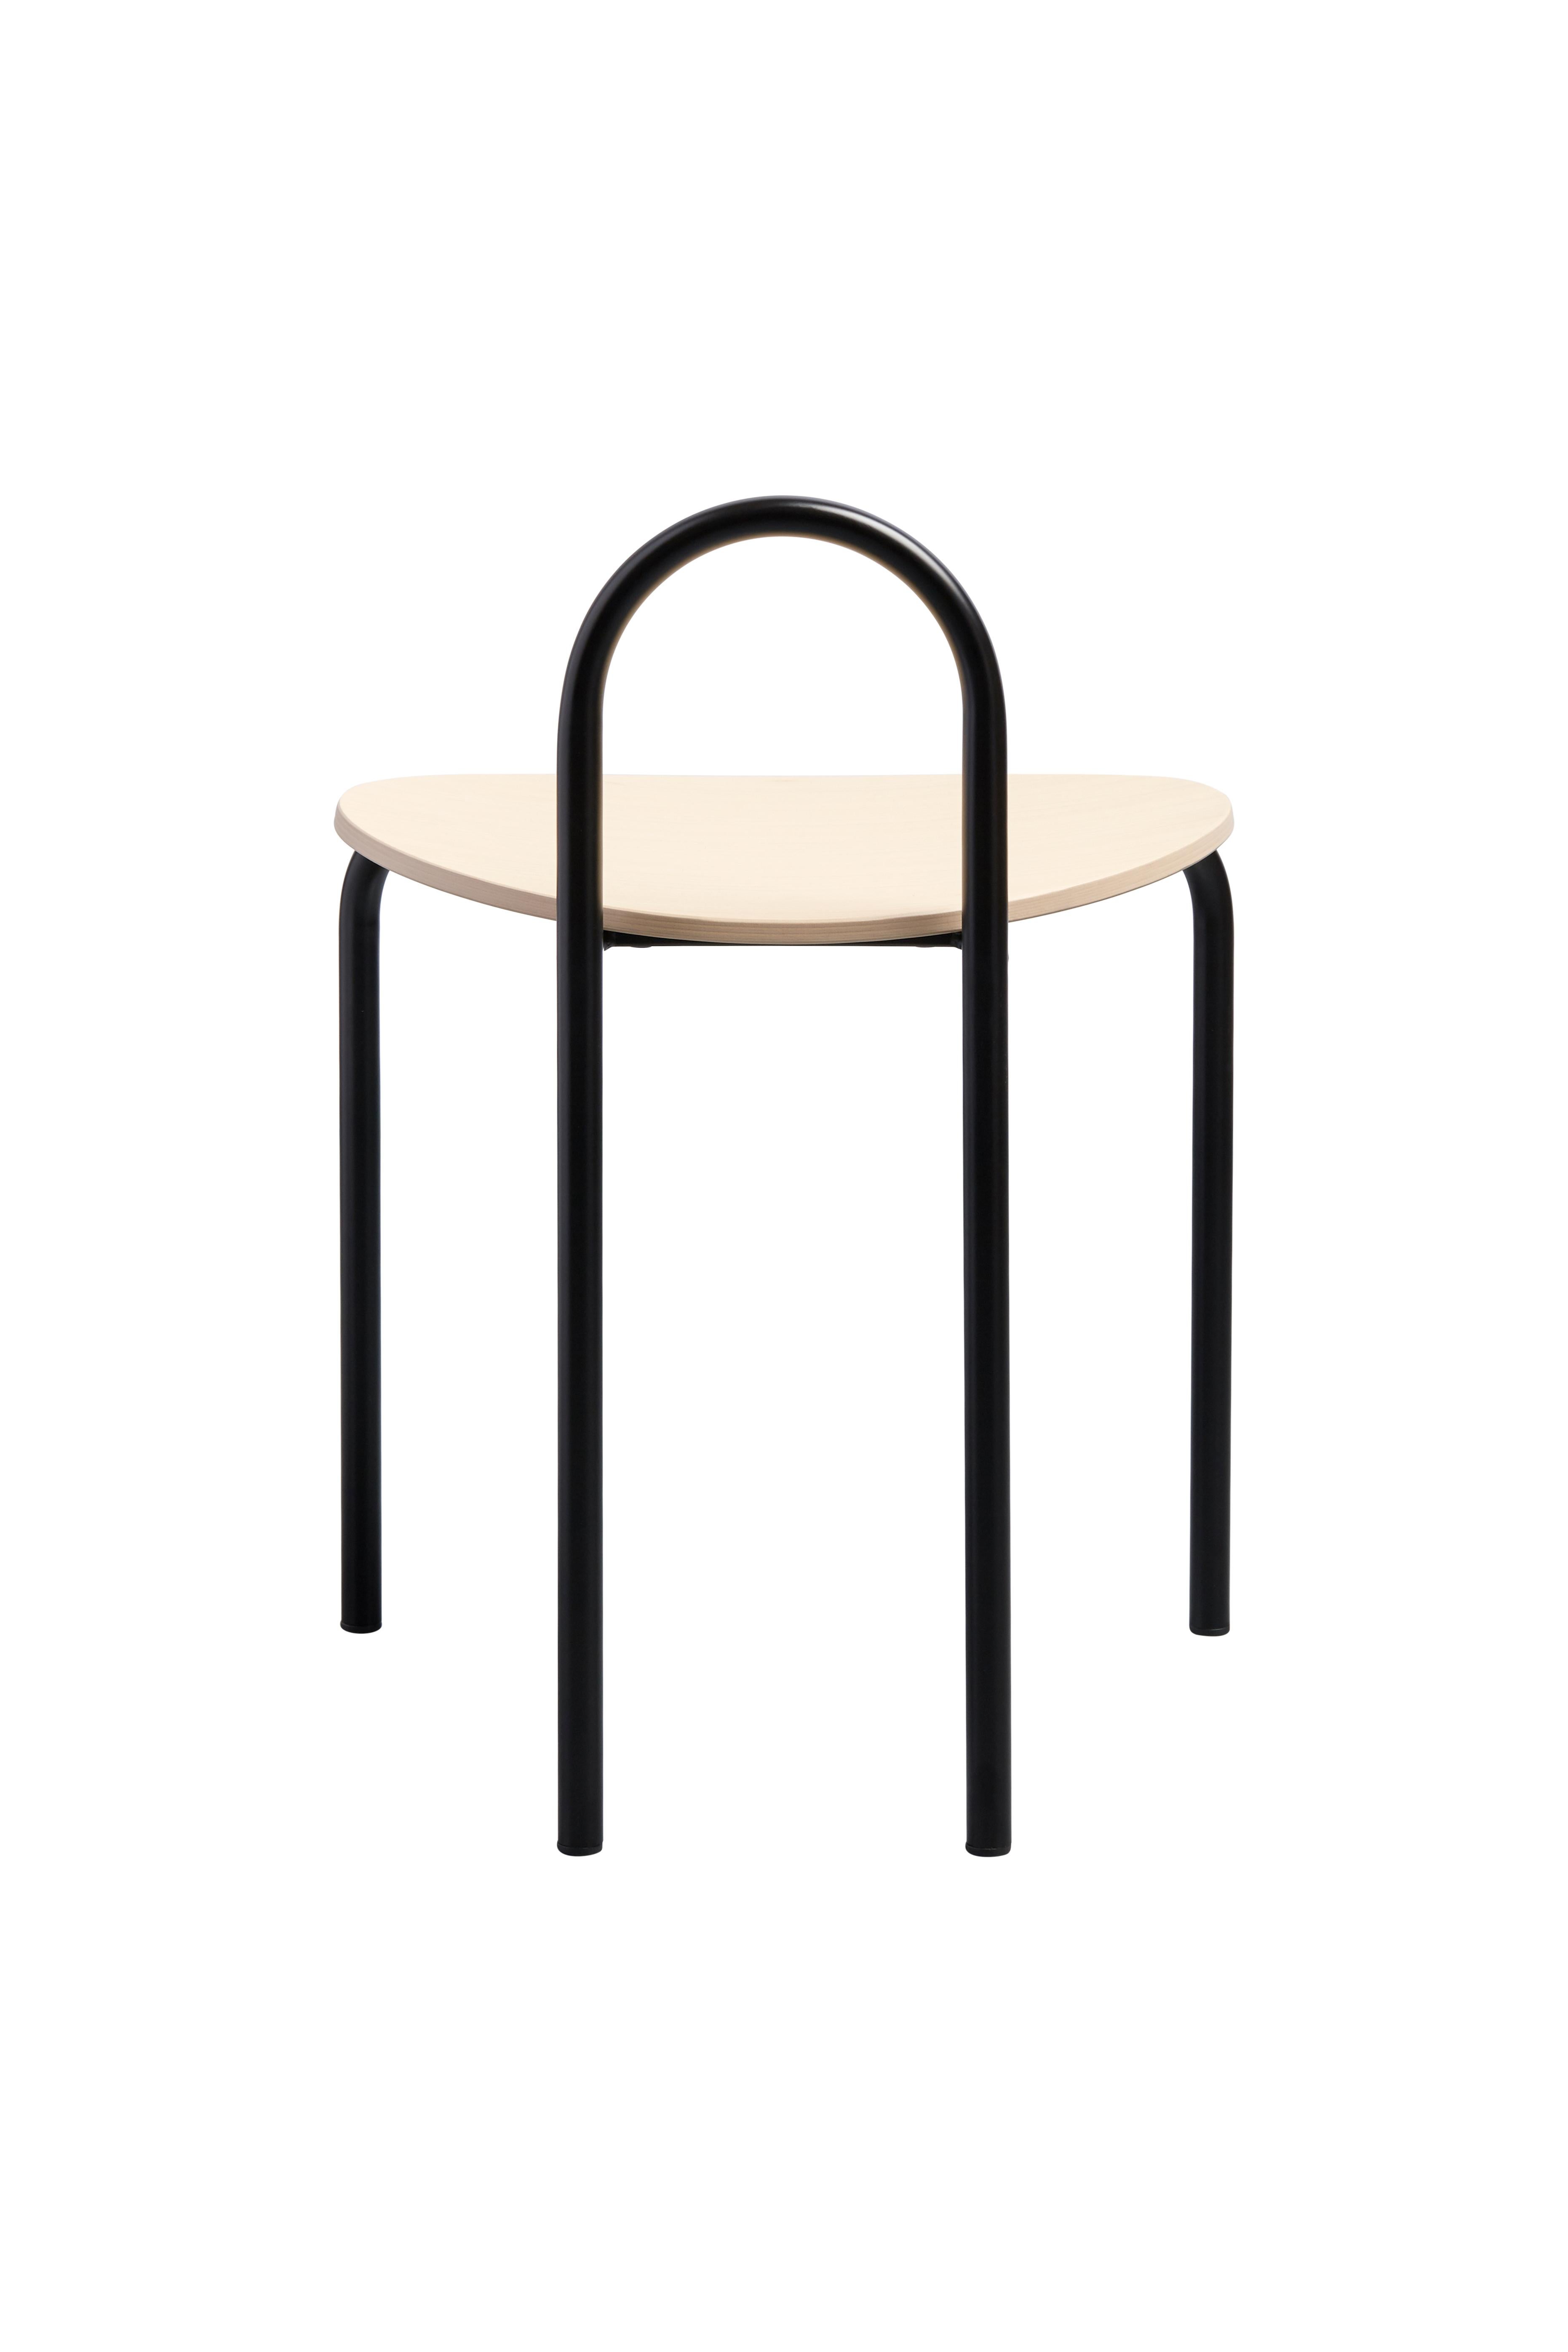 Italian SP01 Michelle Stool in Satin Black, Made in Italy For Sale